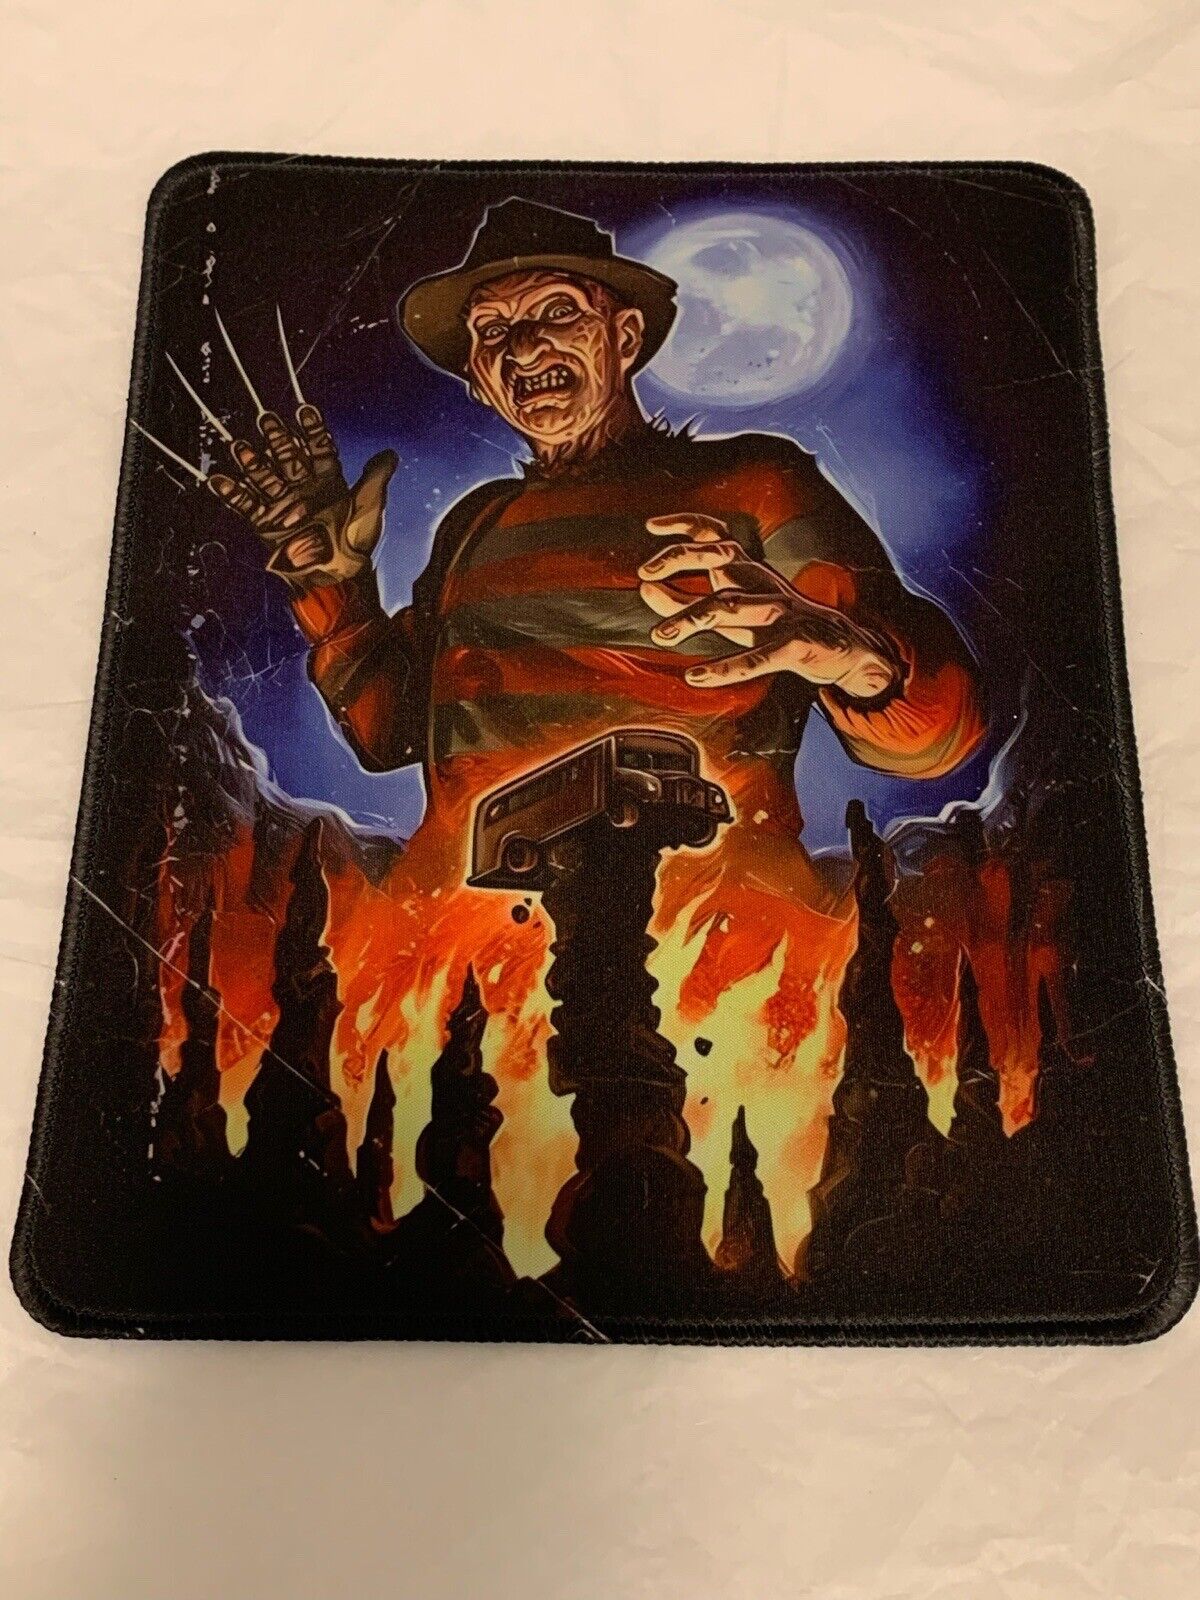 Freddy Krueger A Nightmare on Elm Street Computer Mouse Pad New 8” x 10”